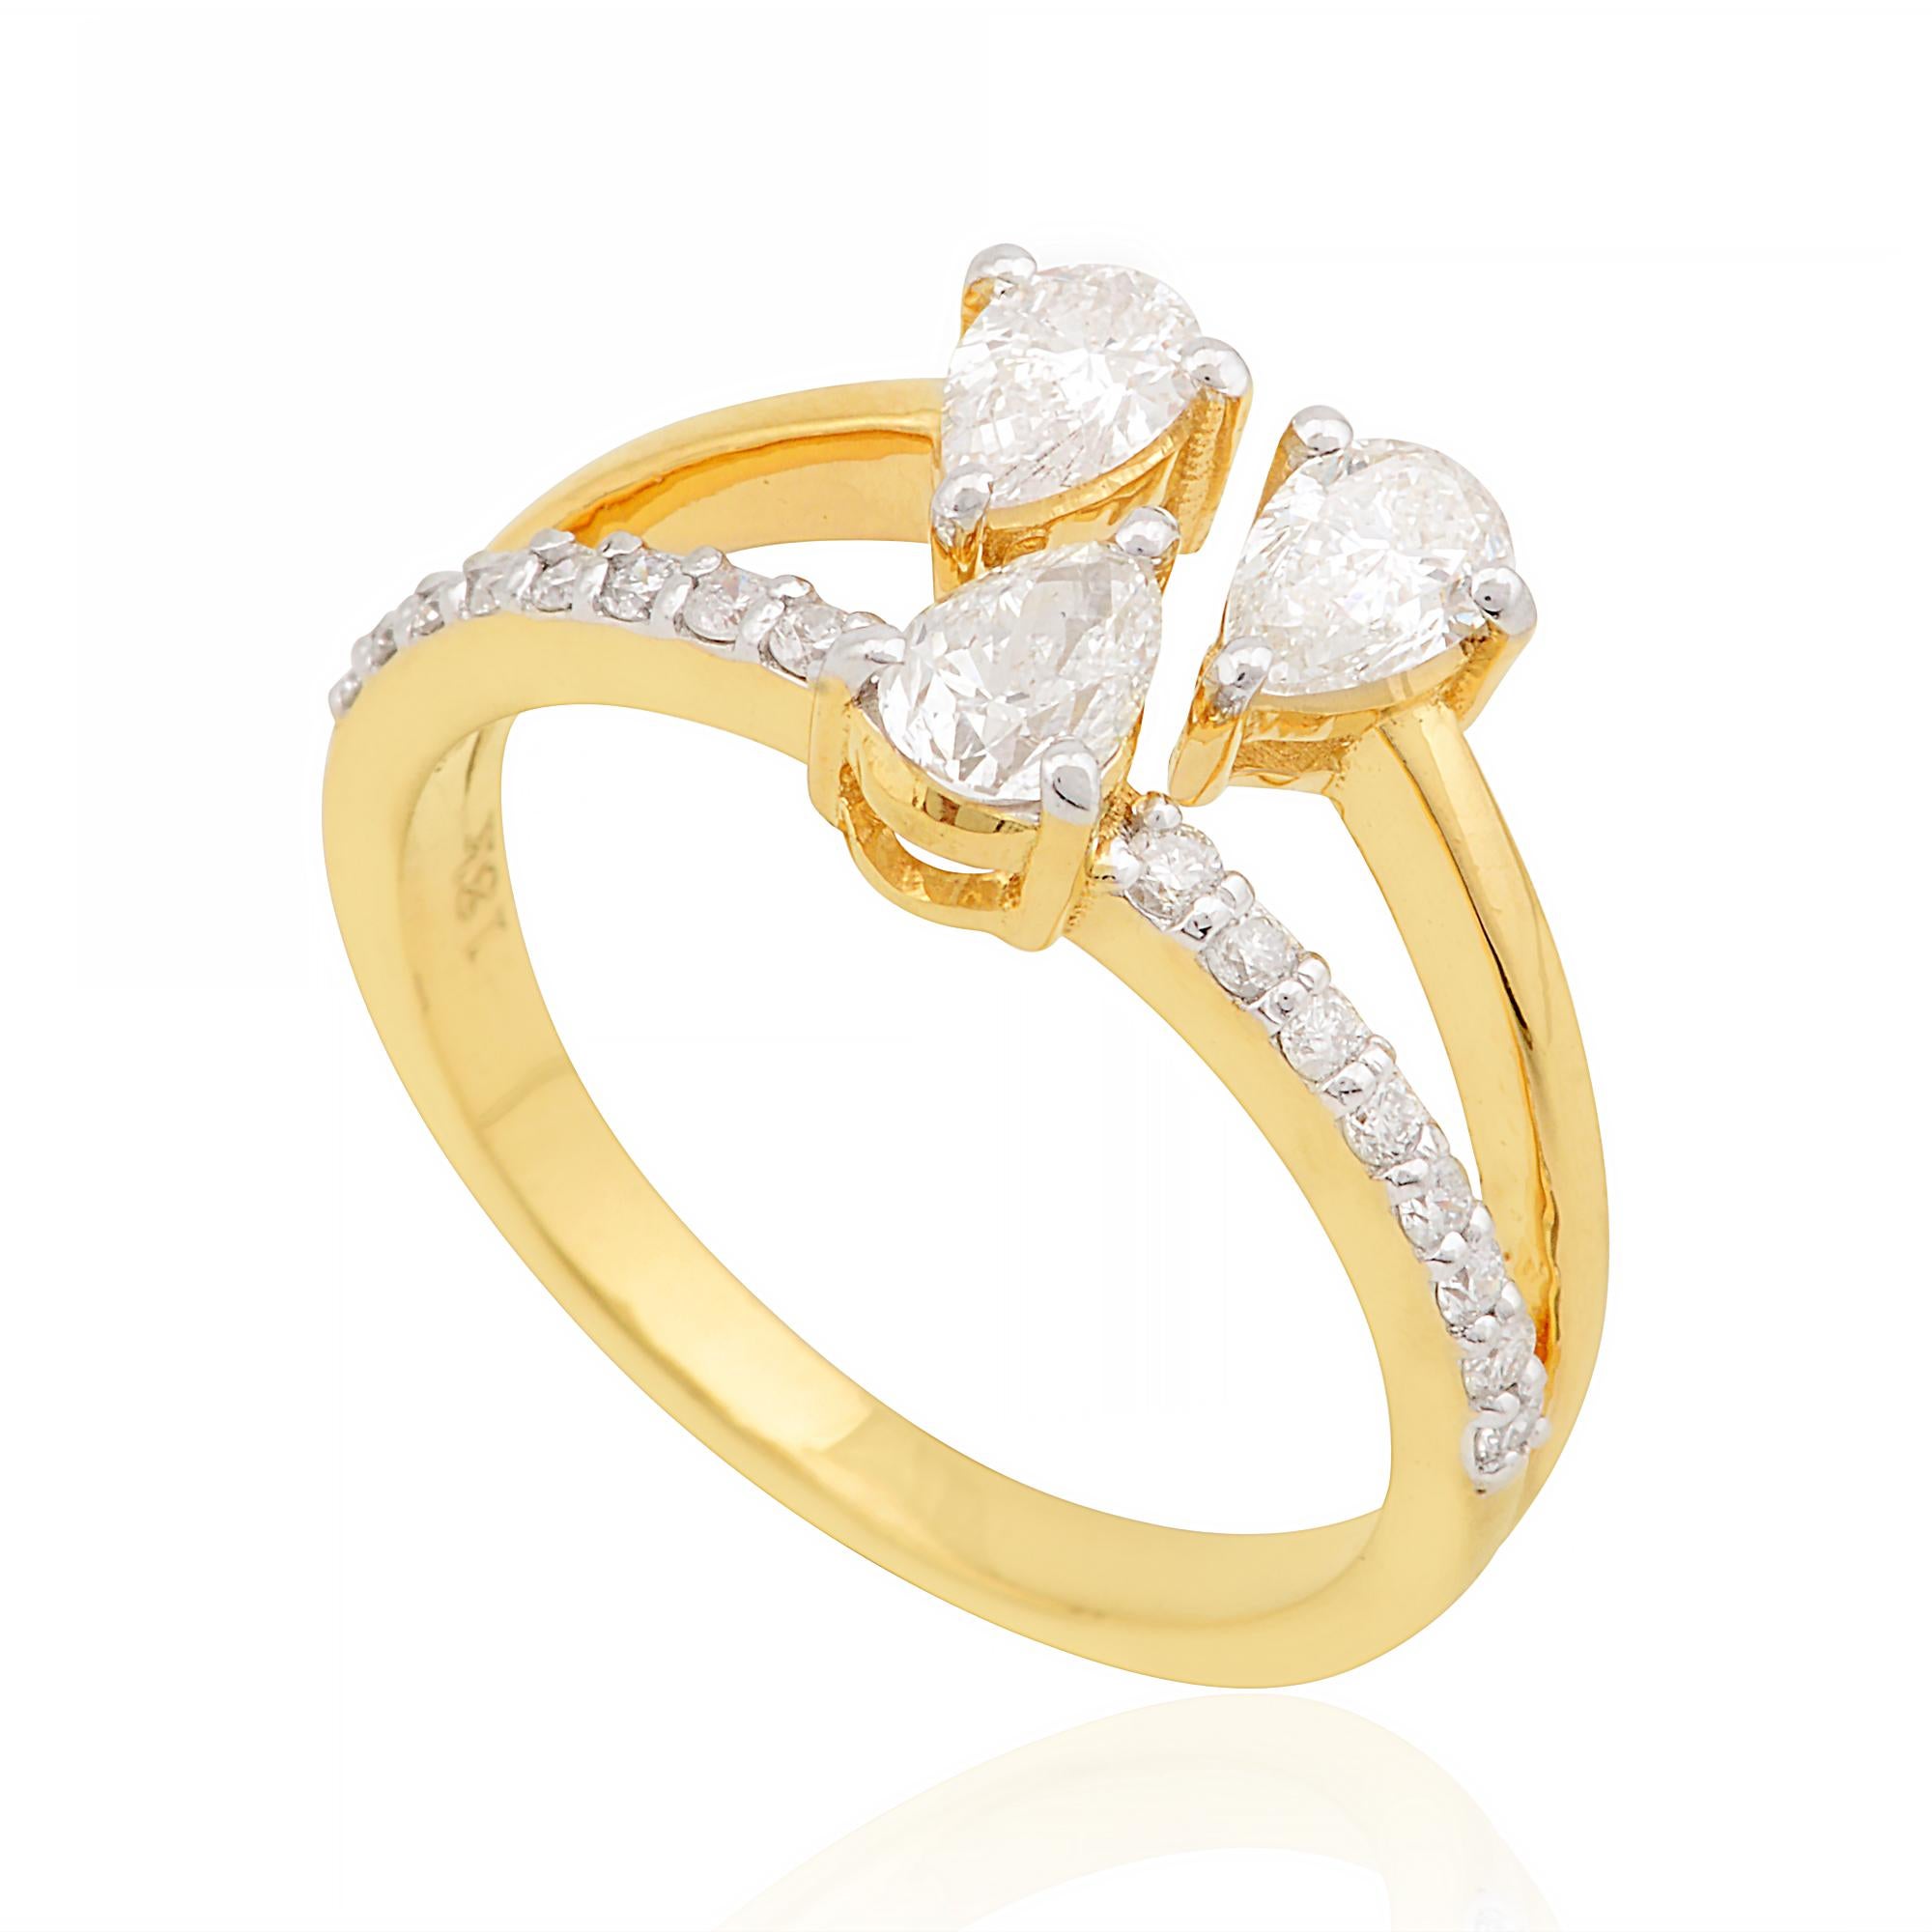 Real 0.90 Carat Pear Diamond Wedding Ring Solid 18k Yellow Gold Handmade Jewelry

Details

Stone :- SER-2583D
Stone Shape :- Pear & Round
Treatment :- Natural
Making :- Handmade
Item Code :- SER-2583D
Gross Weight :- 3.73 gm
18k Yellow Gold Weight